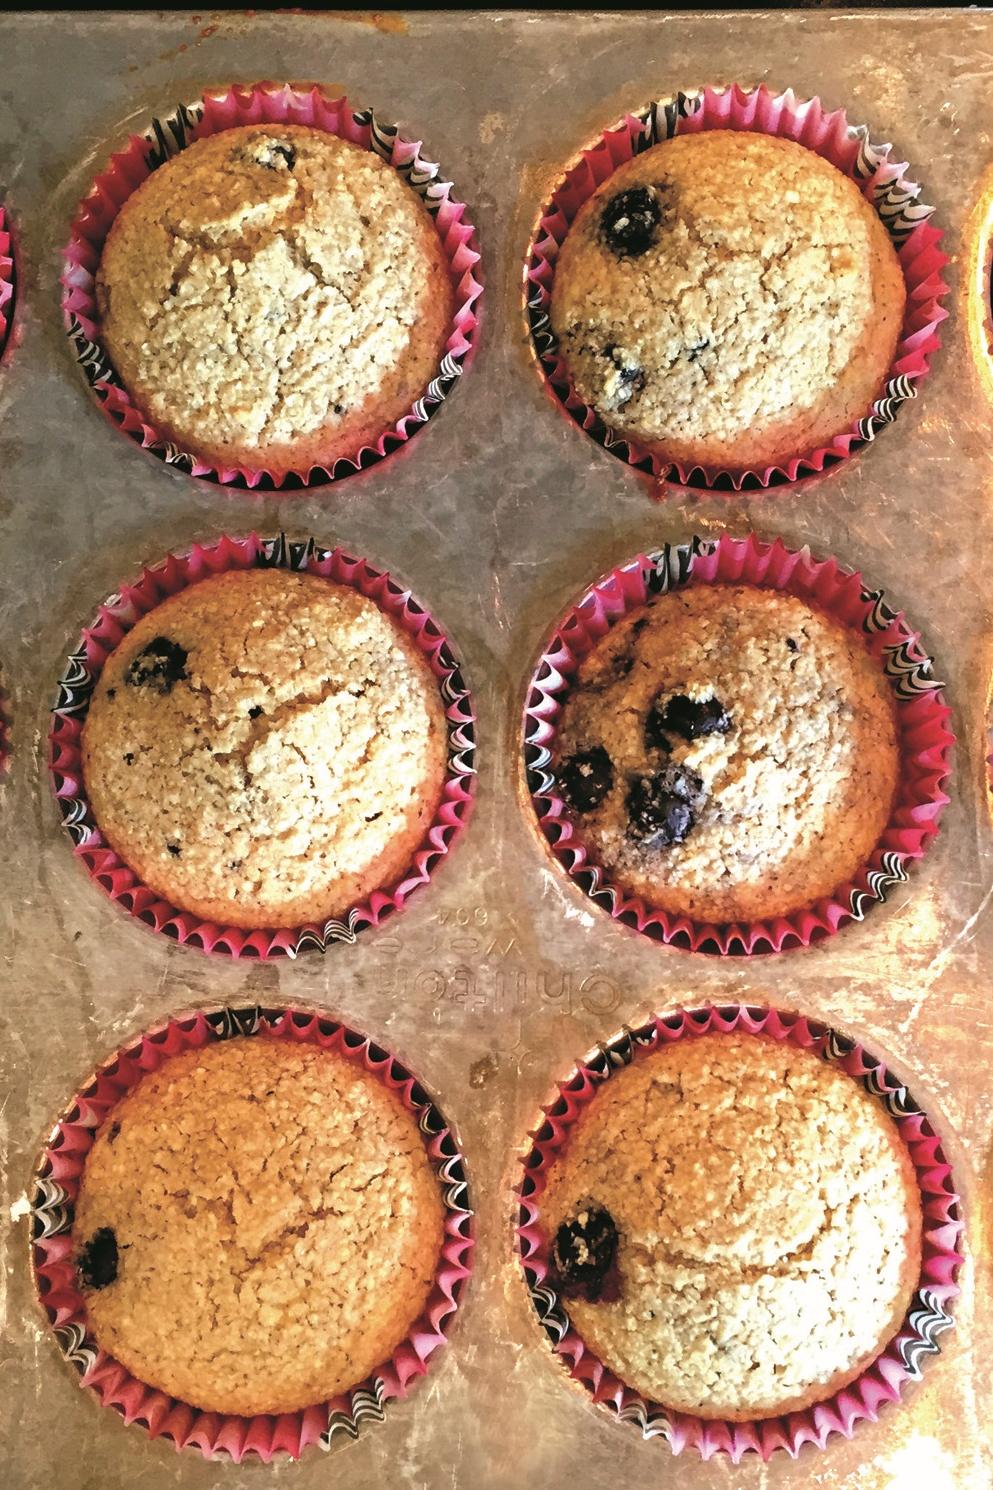 Bran-tastic Fresh Blueberry Muffin Recipe For Anytime Snack